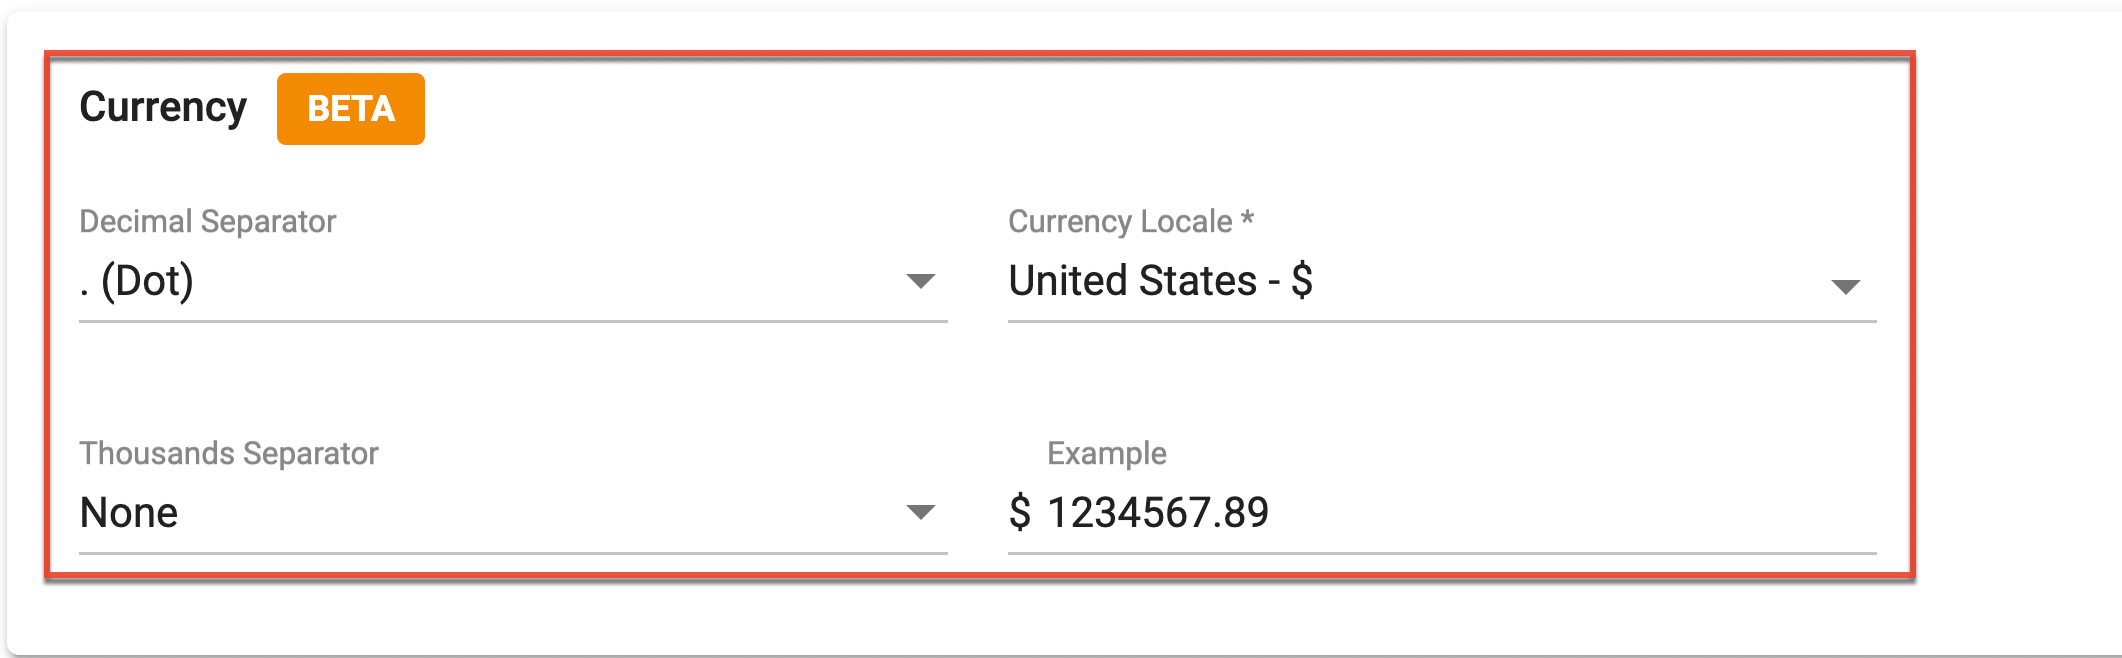 currencyglobalsettings